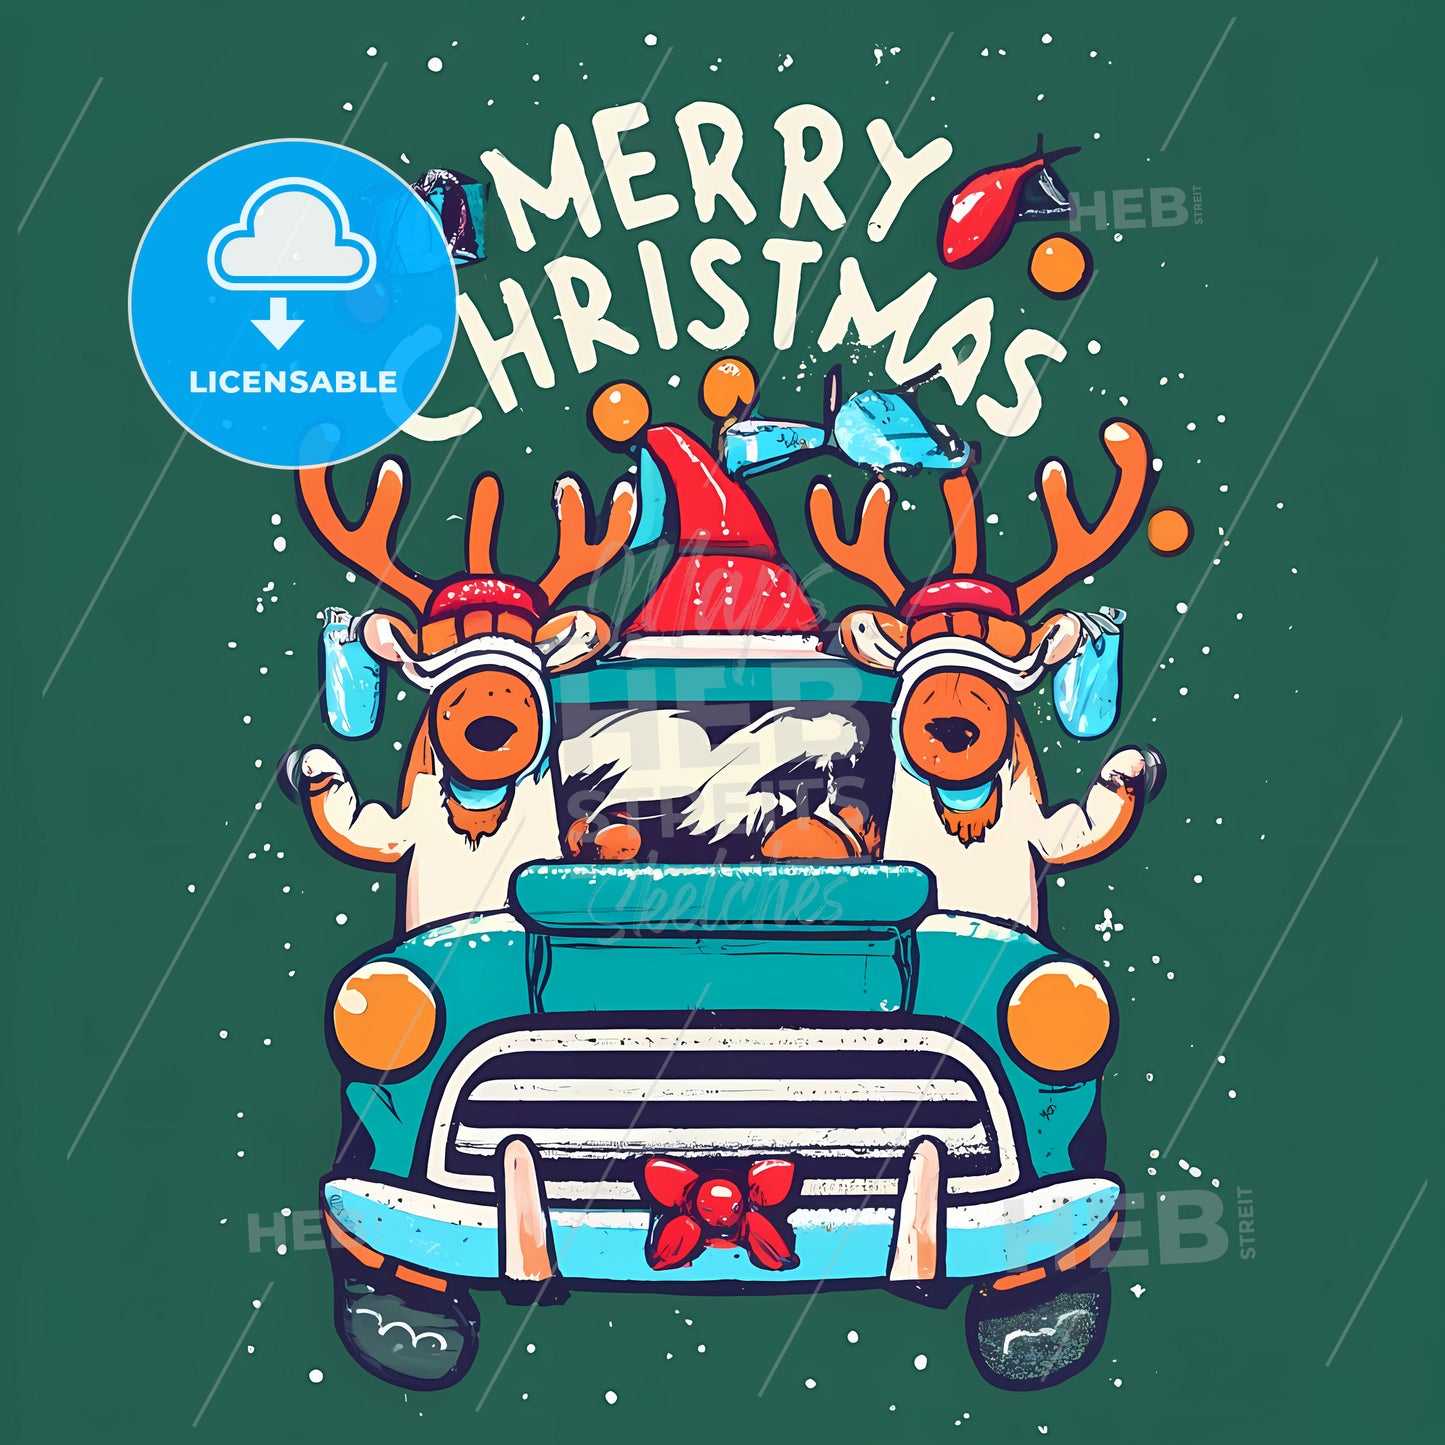 Merry Christmas - A Cartoon Of Reindeers Driving A Car